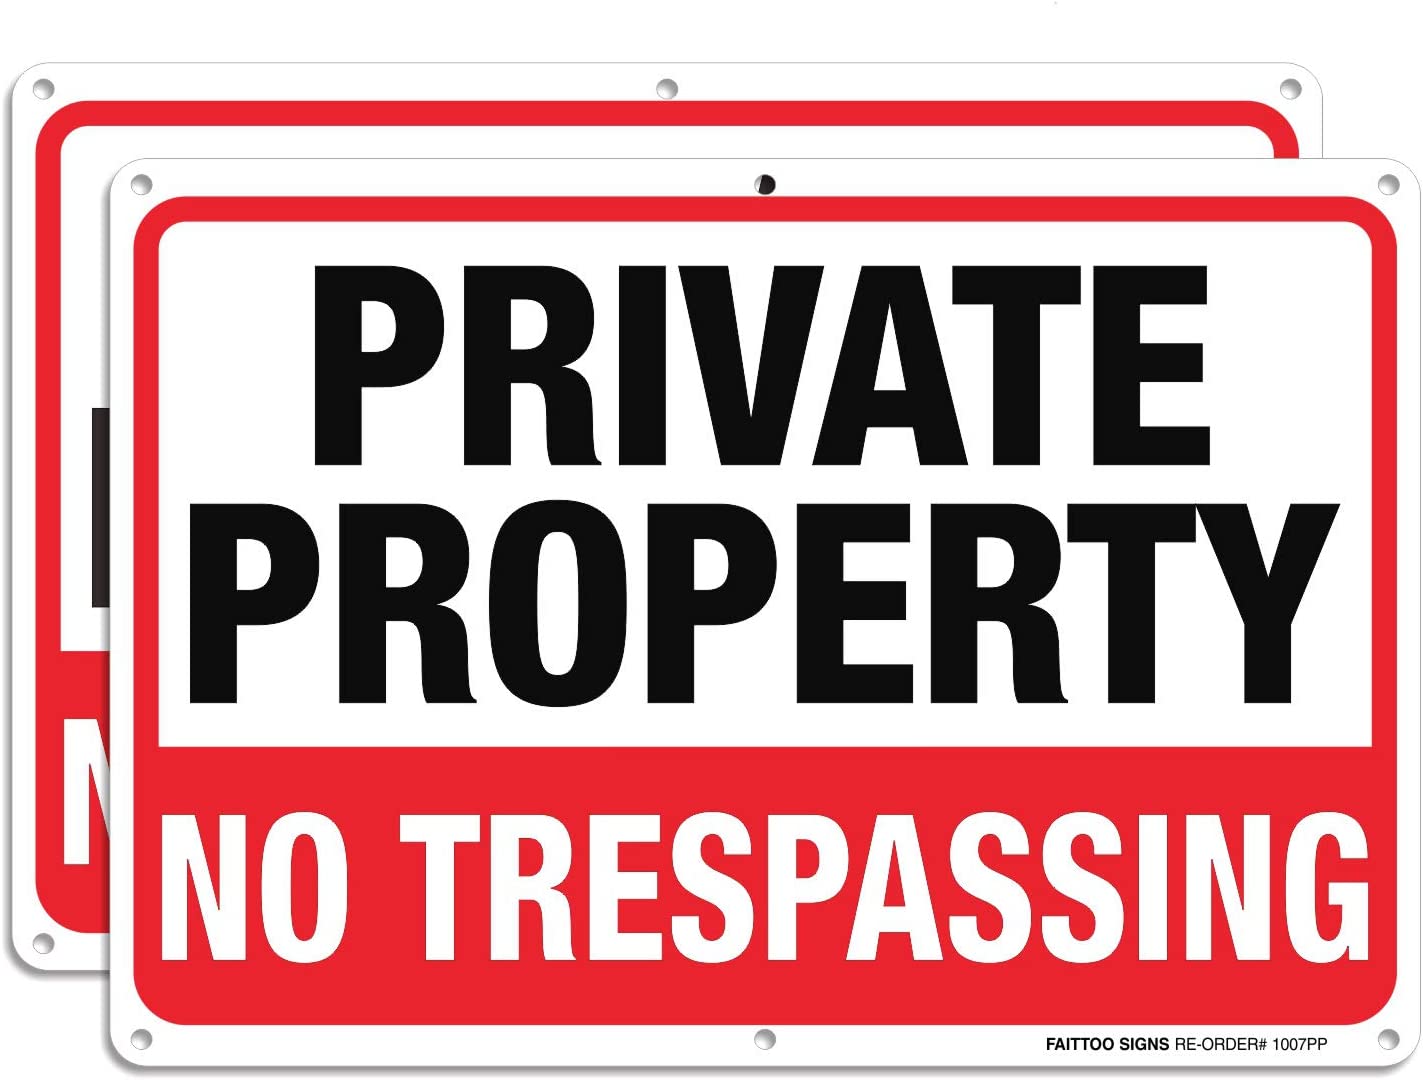 Private Property No Trespassing Metal Sign, 10 x 7 Inches Rust Free .040 Aluminum Sign – Reflective – Weatherproof - Easy to Mount - Indoor &amp; Outdoor use